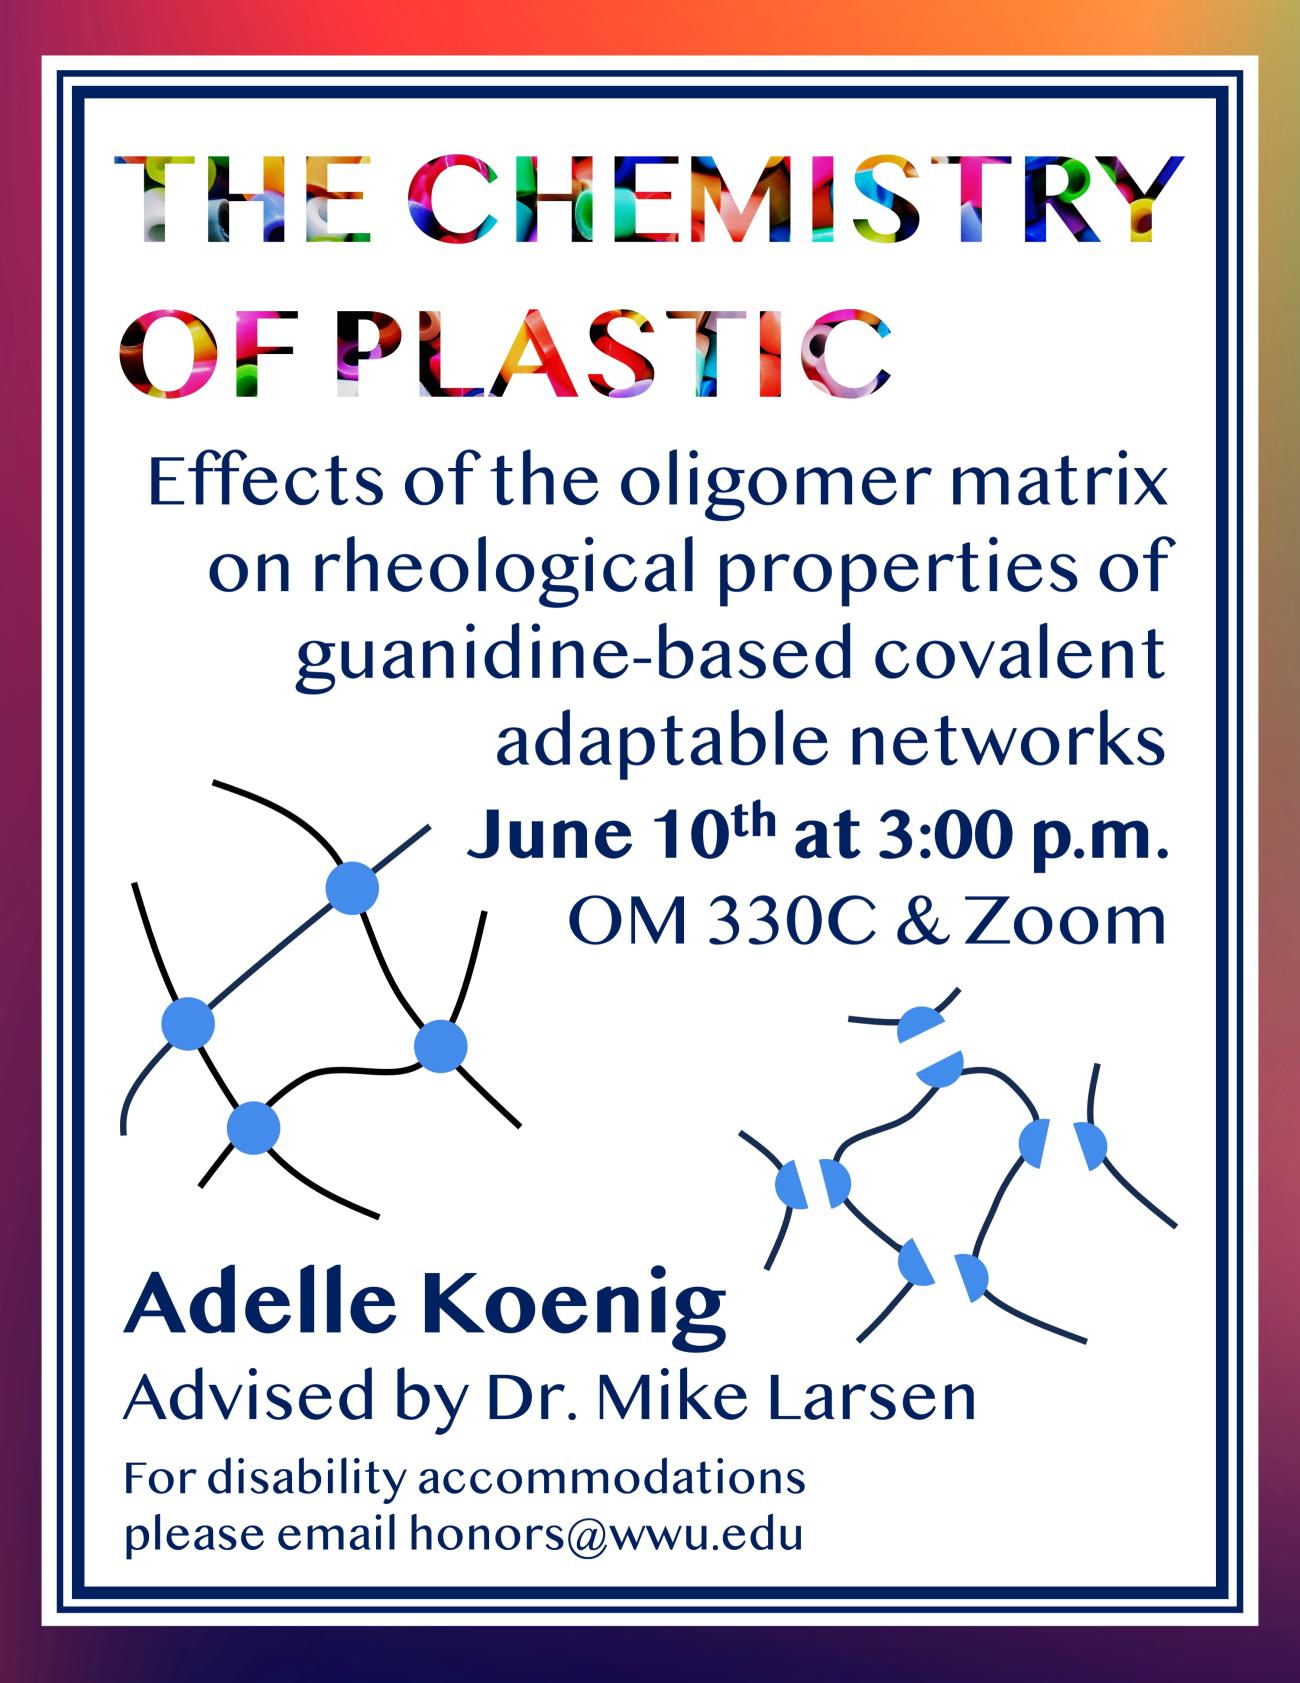 A white poster containing cartoon depictions of two polymers with blue text and a colorful border. The text reads “The Chemistry of Plastic: Effects of the oligomer matrix on rheological properties of guanidine-based covalent adaptable networks. June 10th at 3:00 p.m. OM 330C & Zoom. Adelle Koenig. Advised by Dr. Mike Larsen. For disability accommodations please email honors@wwu.edu”